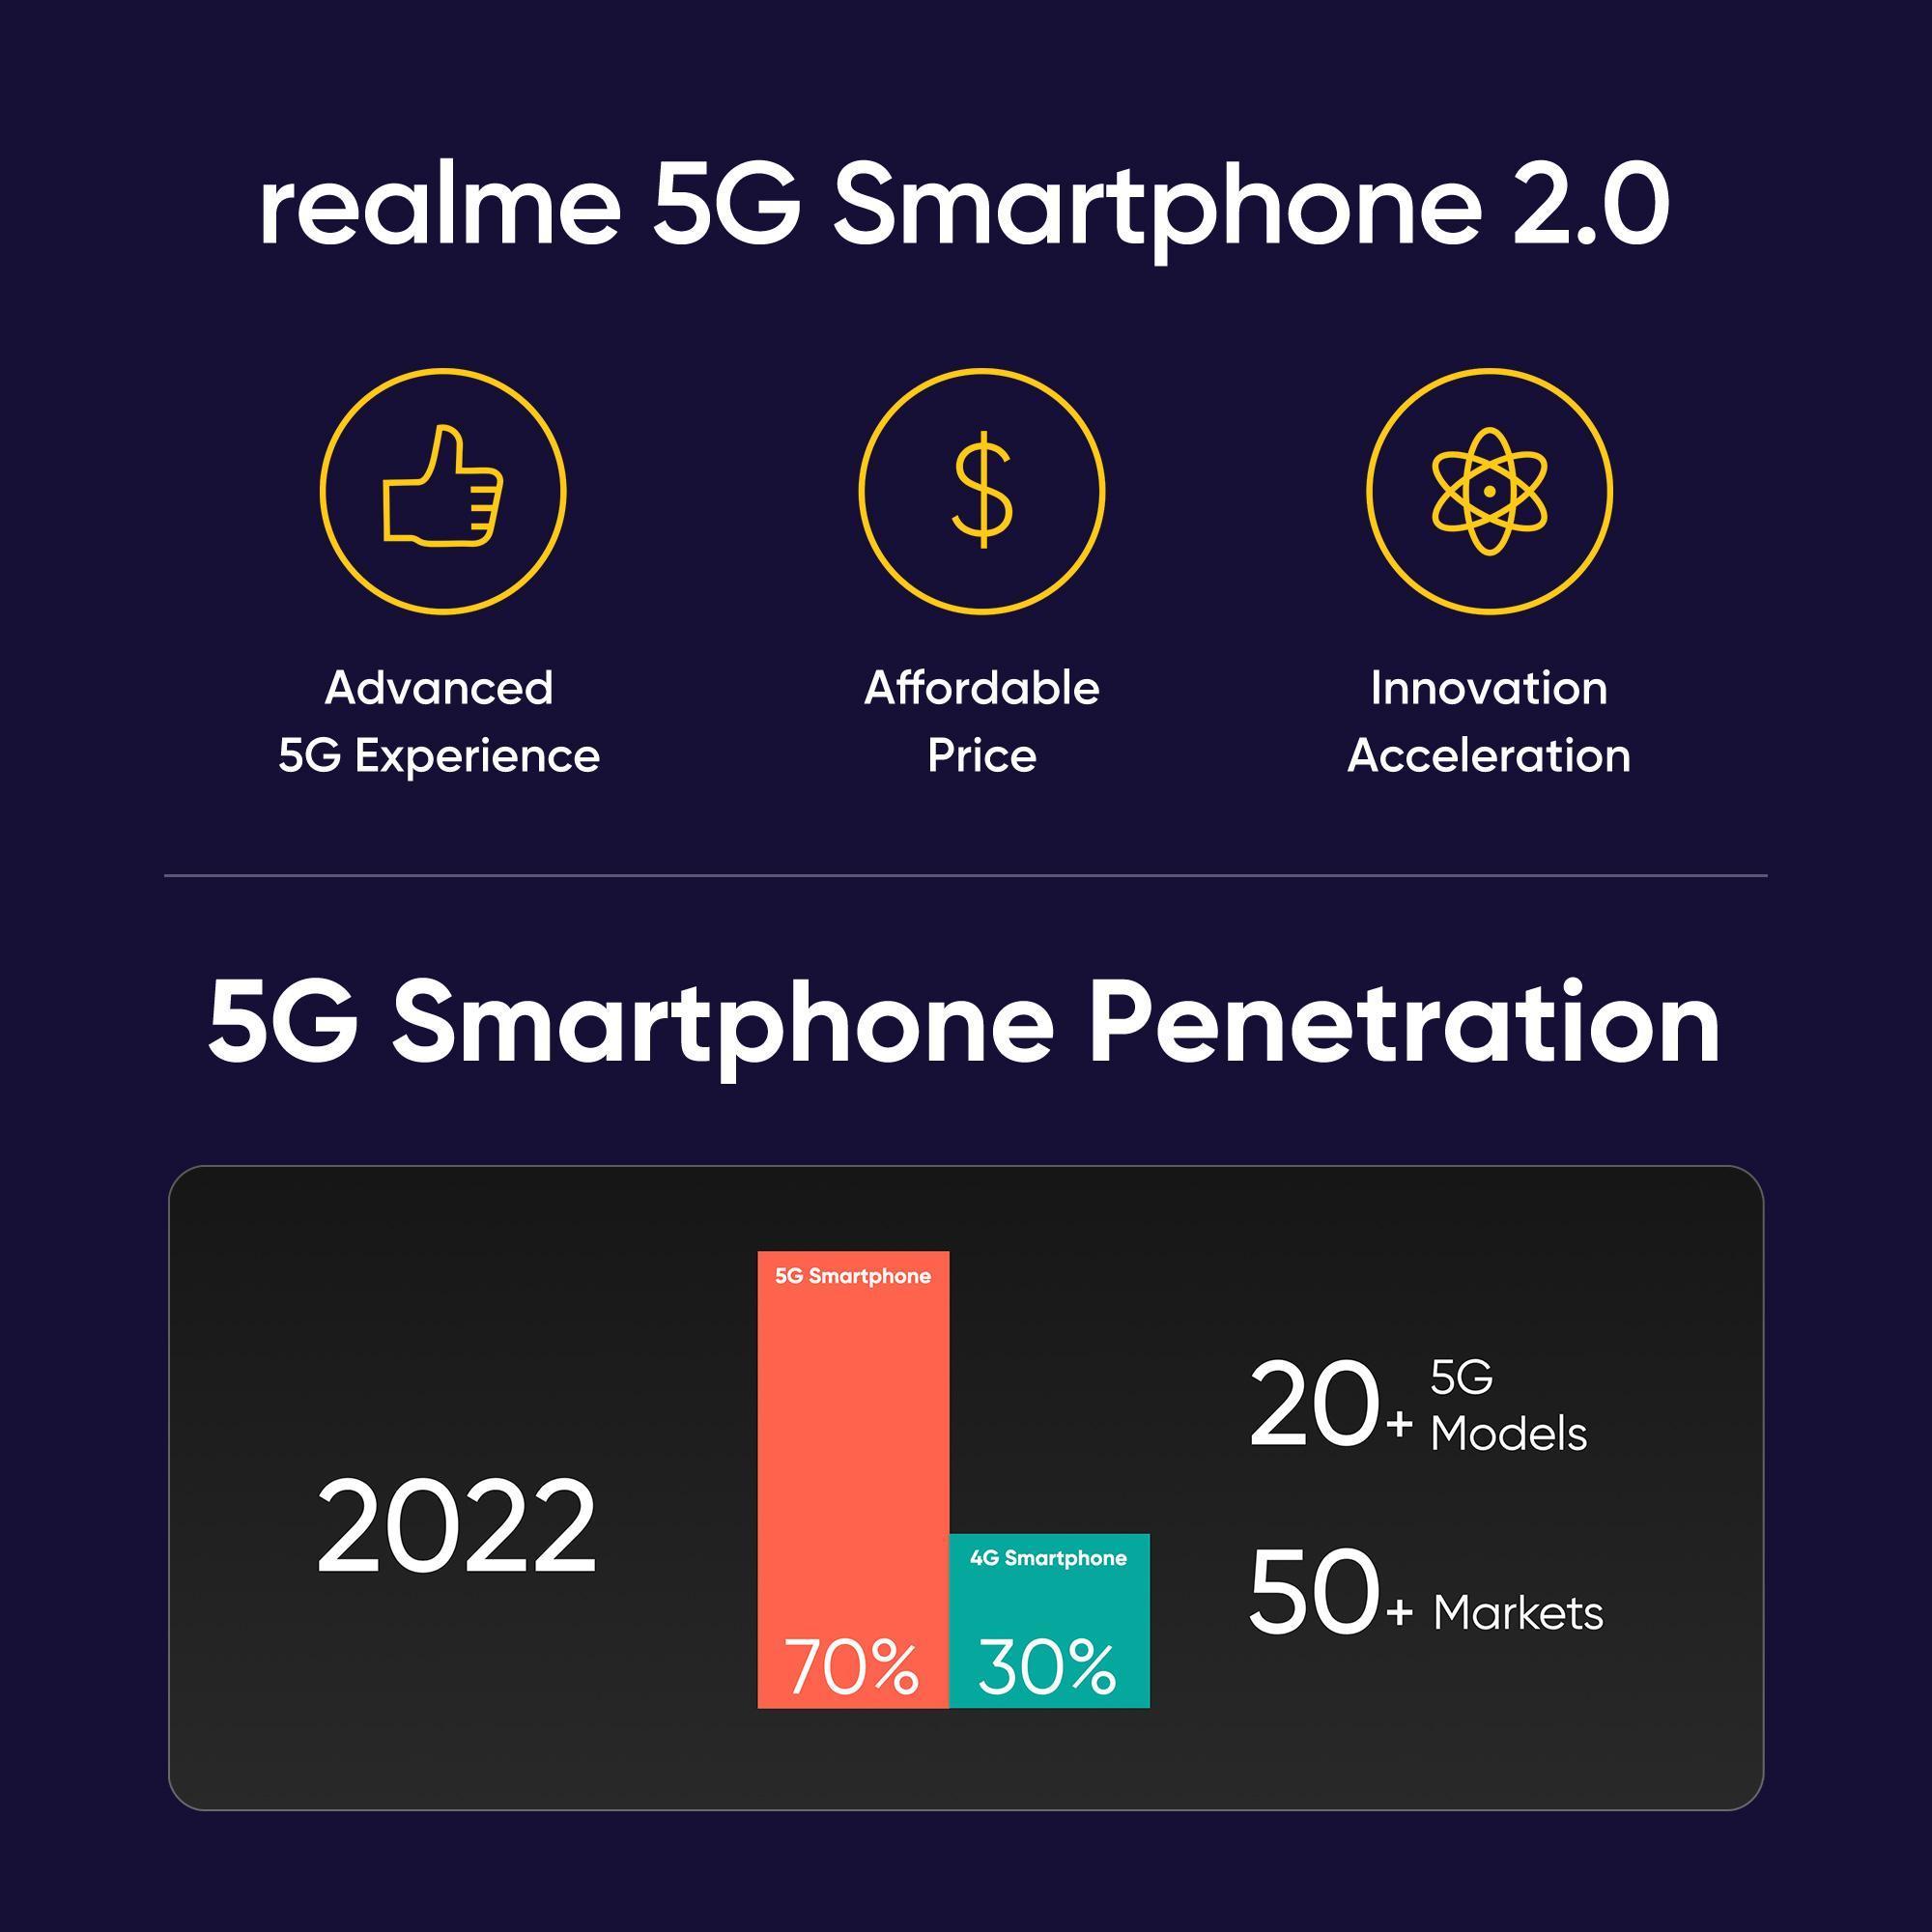 One Out of Every Two Smartphones Will Support 5G by End of 2022, According to The Whitepaper Jointly Released by realme and Counterpoint